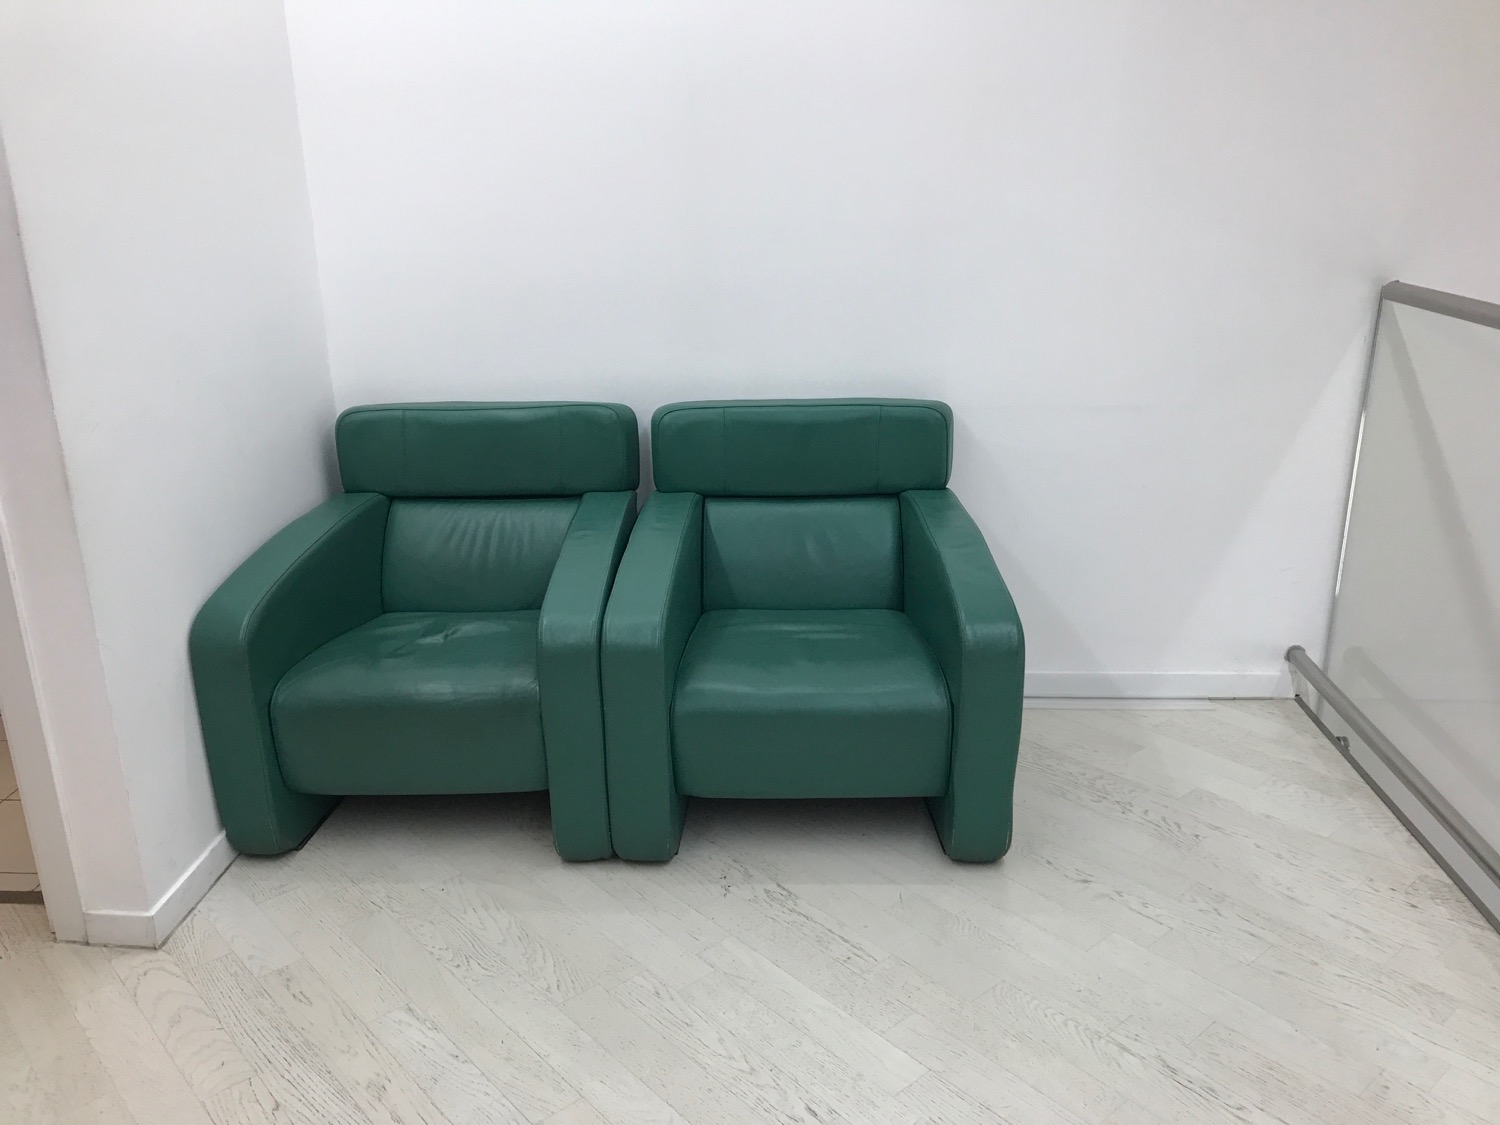 two green chairs in a room